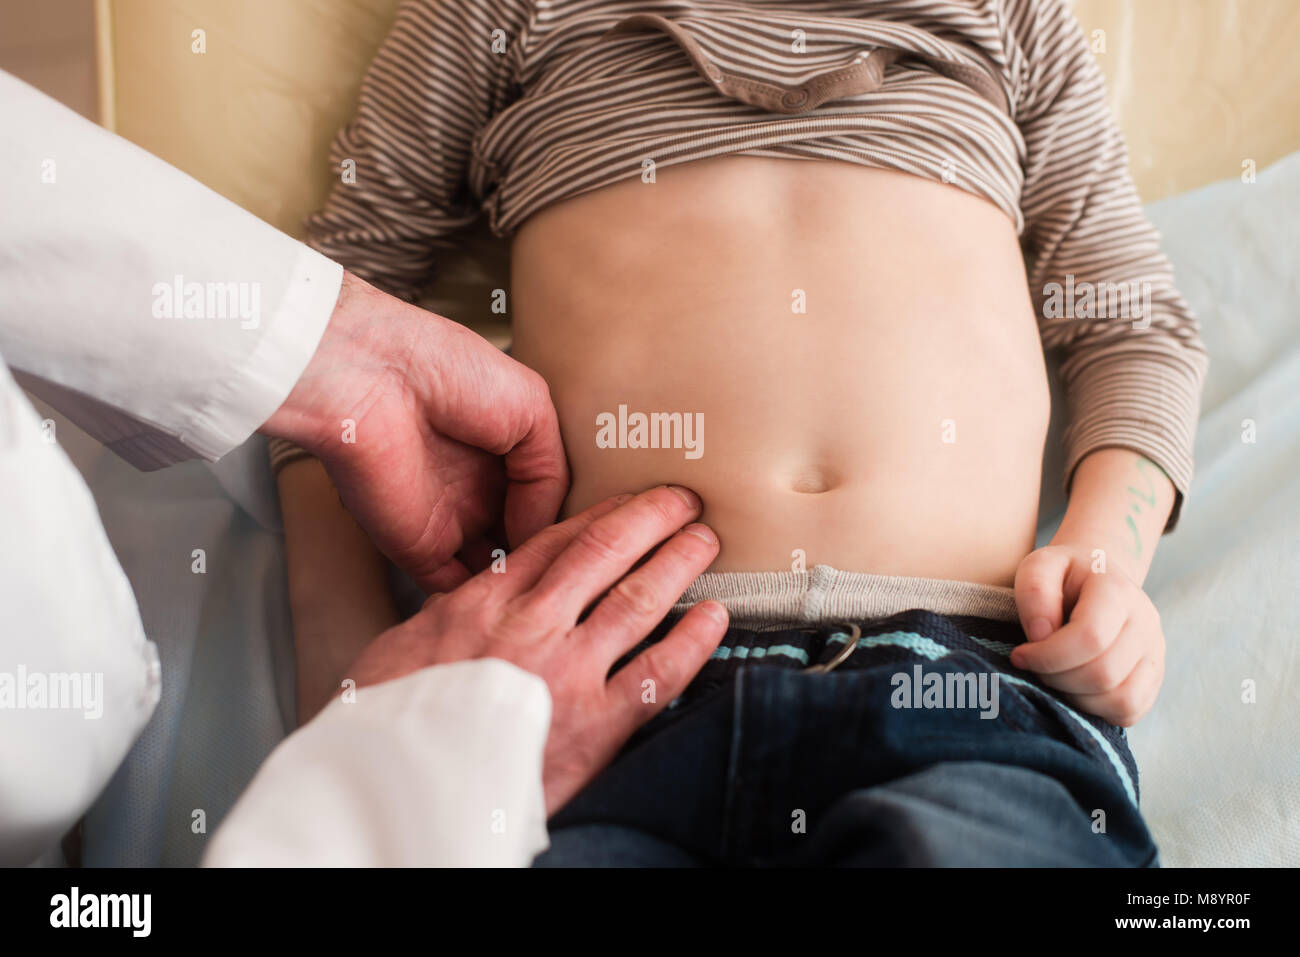 kid-doctor-touch-belly-of-small-patient-with-fingers-pediatrician-M8YR0F.jpg